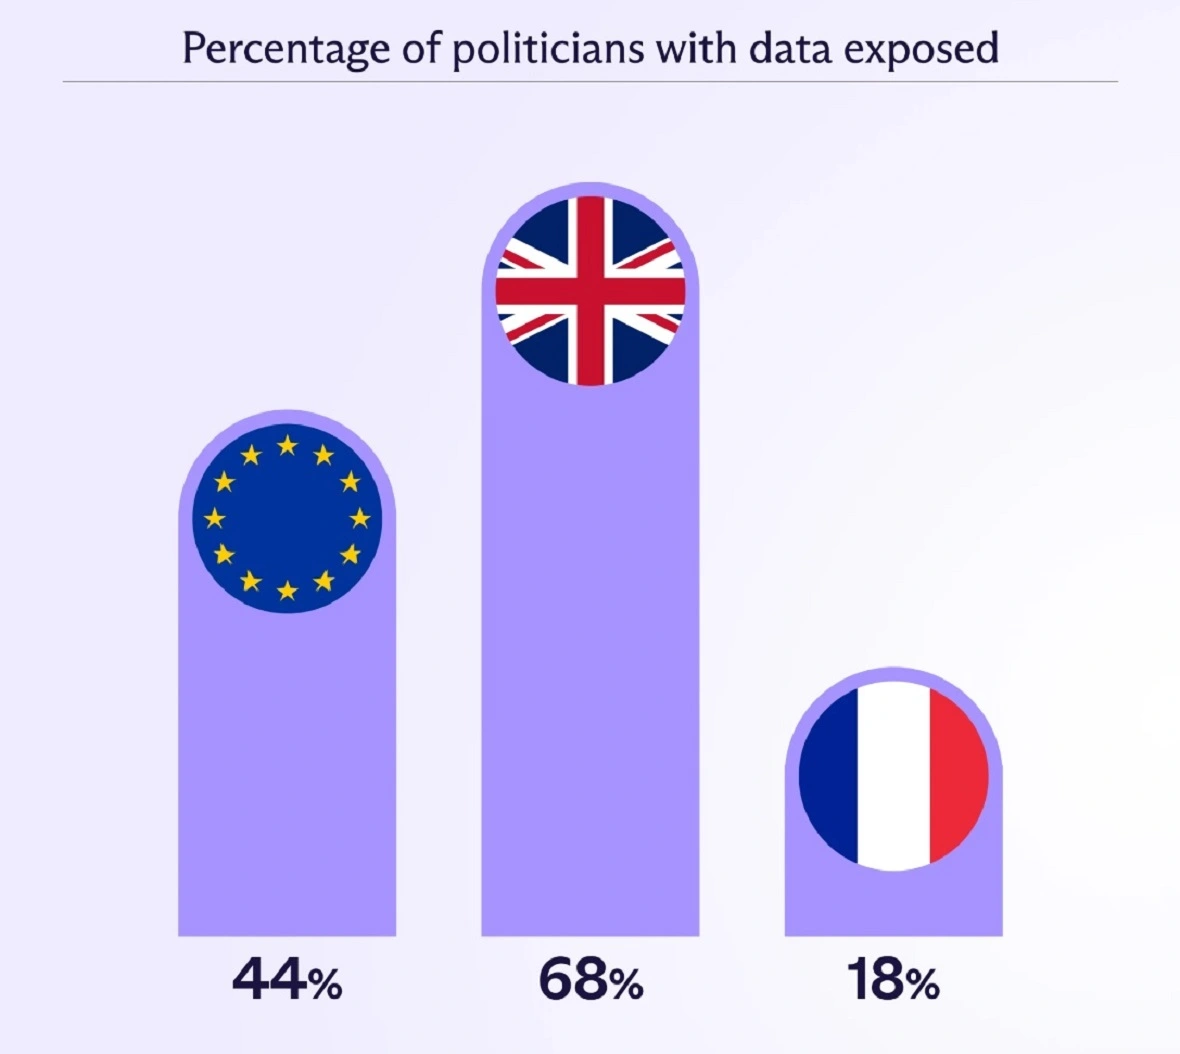 Image showing the percentage of breached politicians in France, the UK, and the EU. 